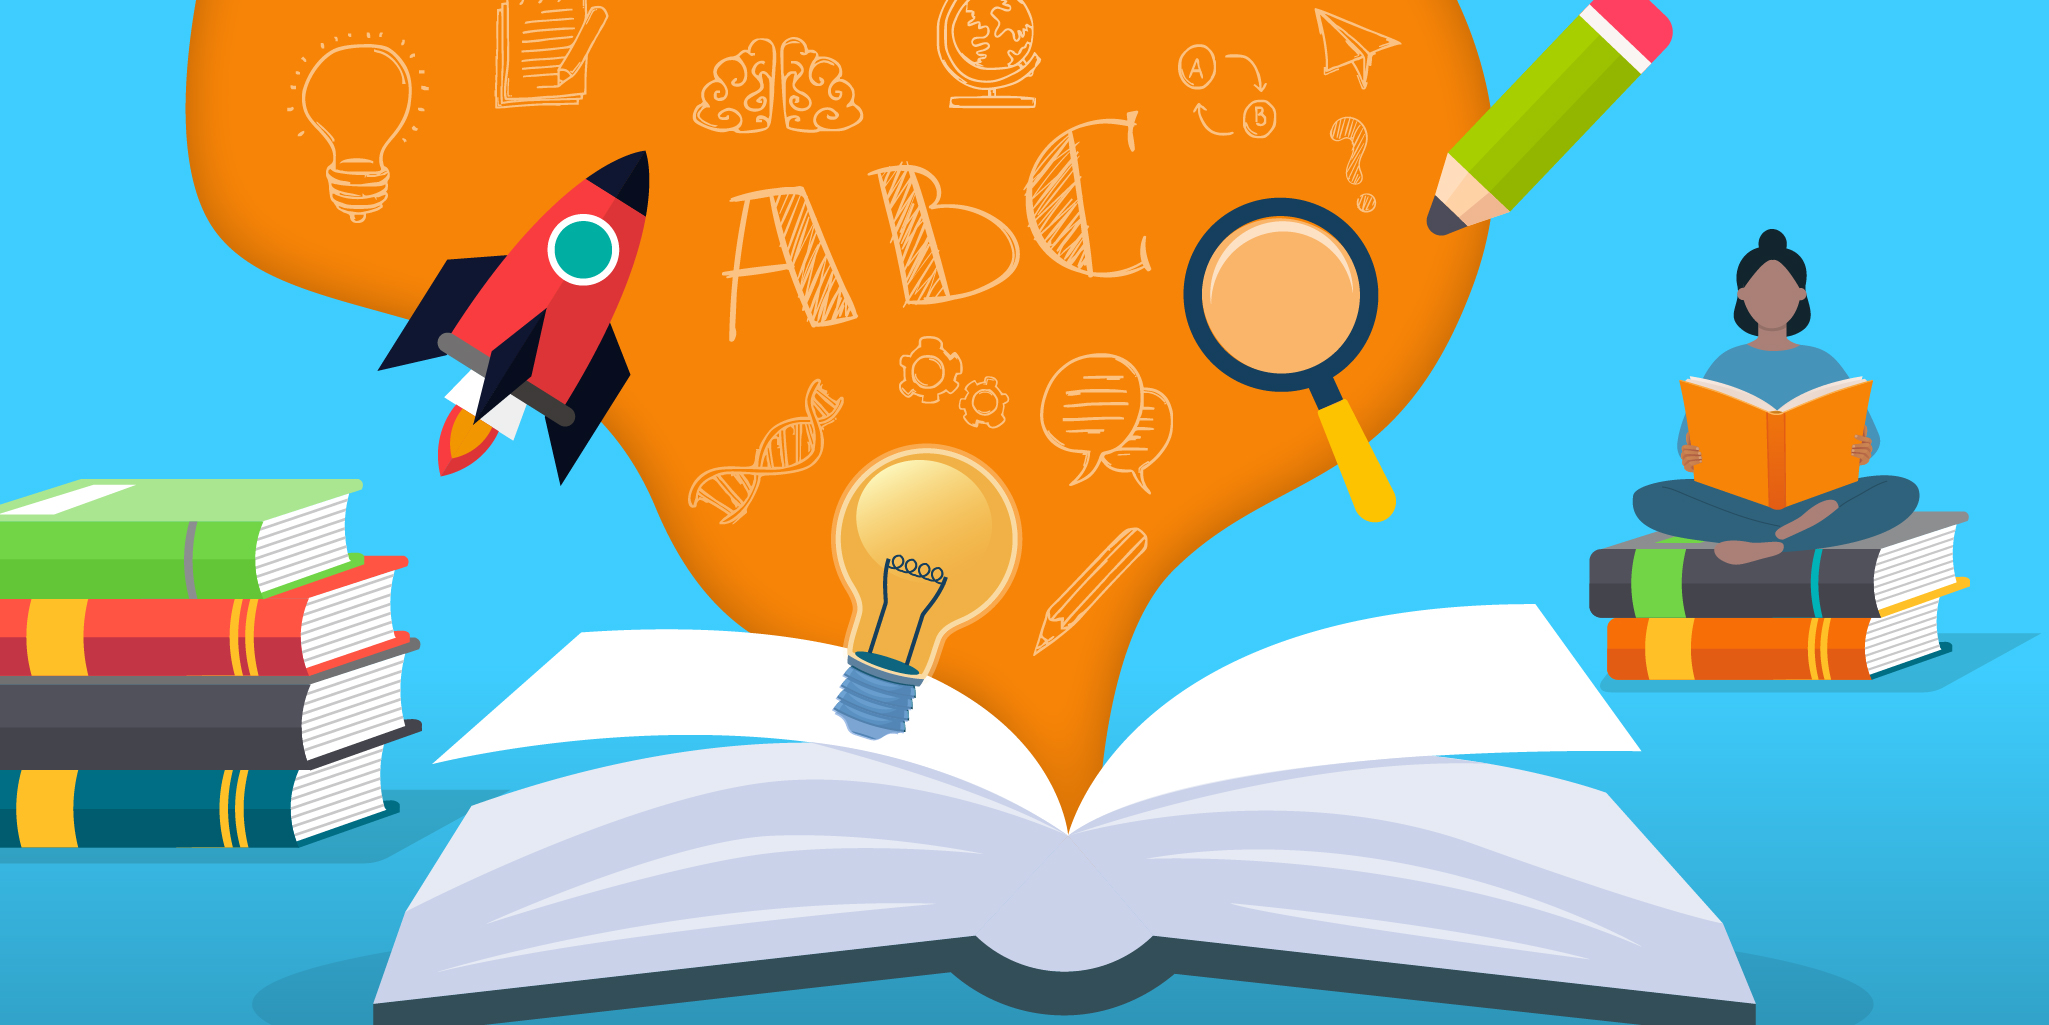 An illustration featuring reading-related elements like books, alphabets, and a lightbulb, symbolizing the comprehensive approach of BookNook's reading instruction strategies, complemented by exclusive 'Nook Nuggets'.